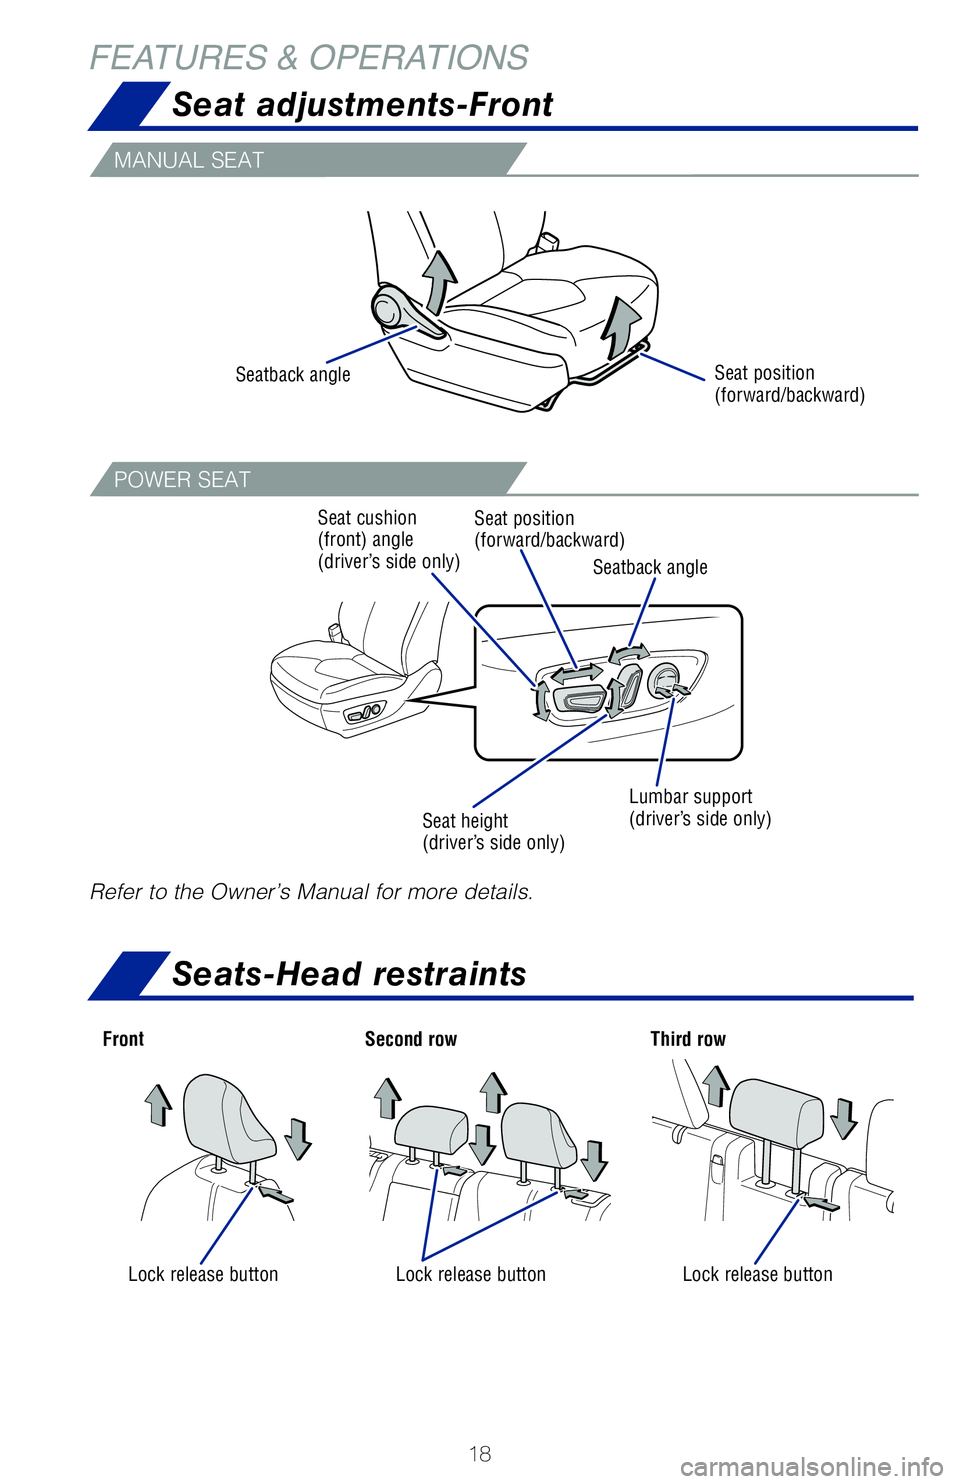 TOYOTA HIGHLANDER 2020   (in English) User Guide 18
MANUAL SEAT
POWER SEAT
Refer to the Owner’s Manual for more details.
Seat position 
(forward/backward)
Seatback angle
Seatback angle
Seat position 
(forward/backward)
Seat cushion 
(front) angle 